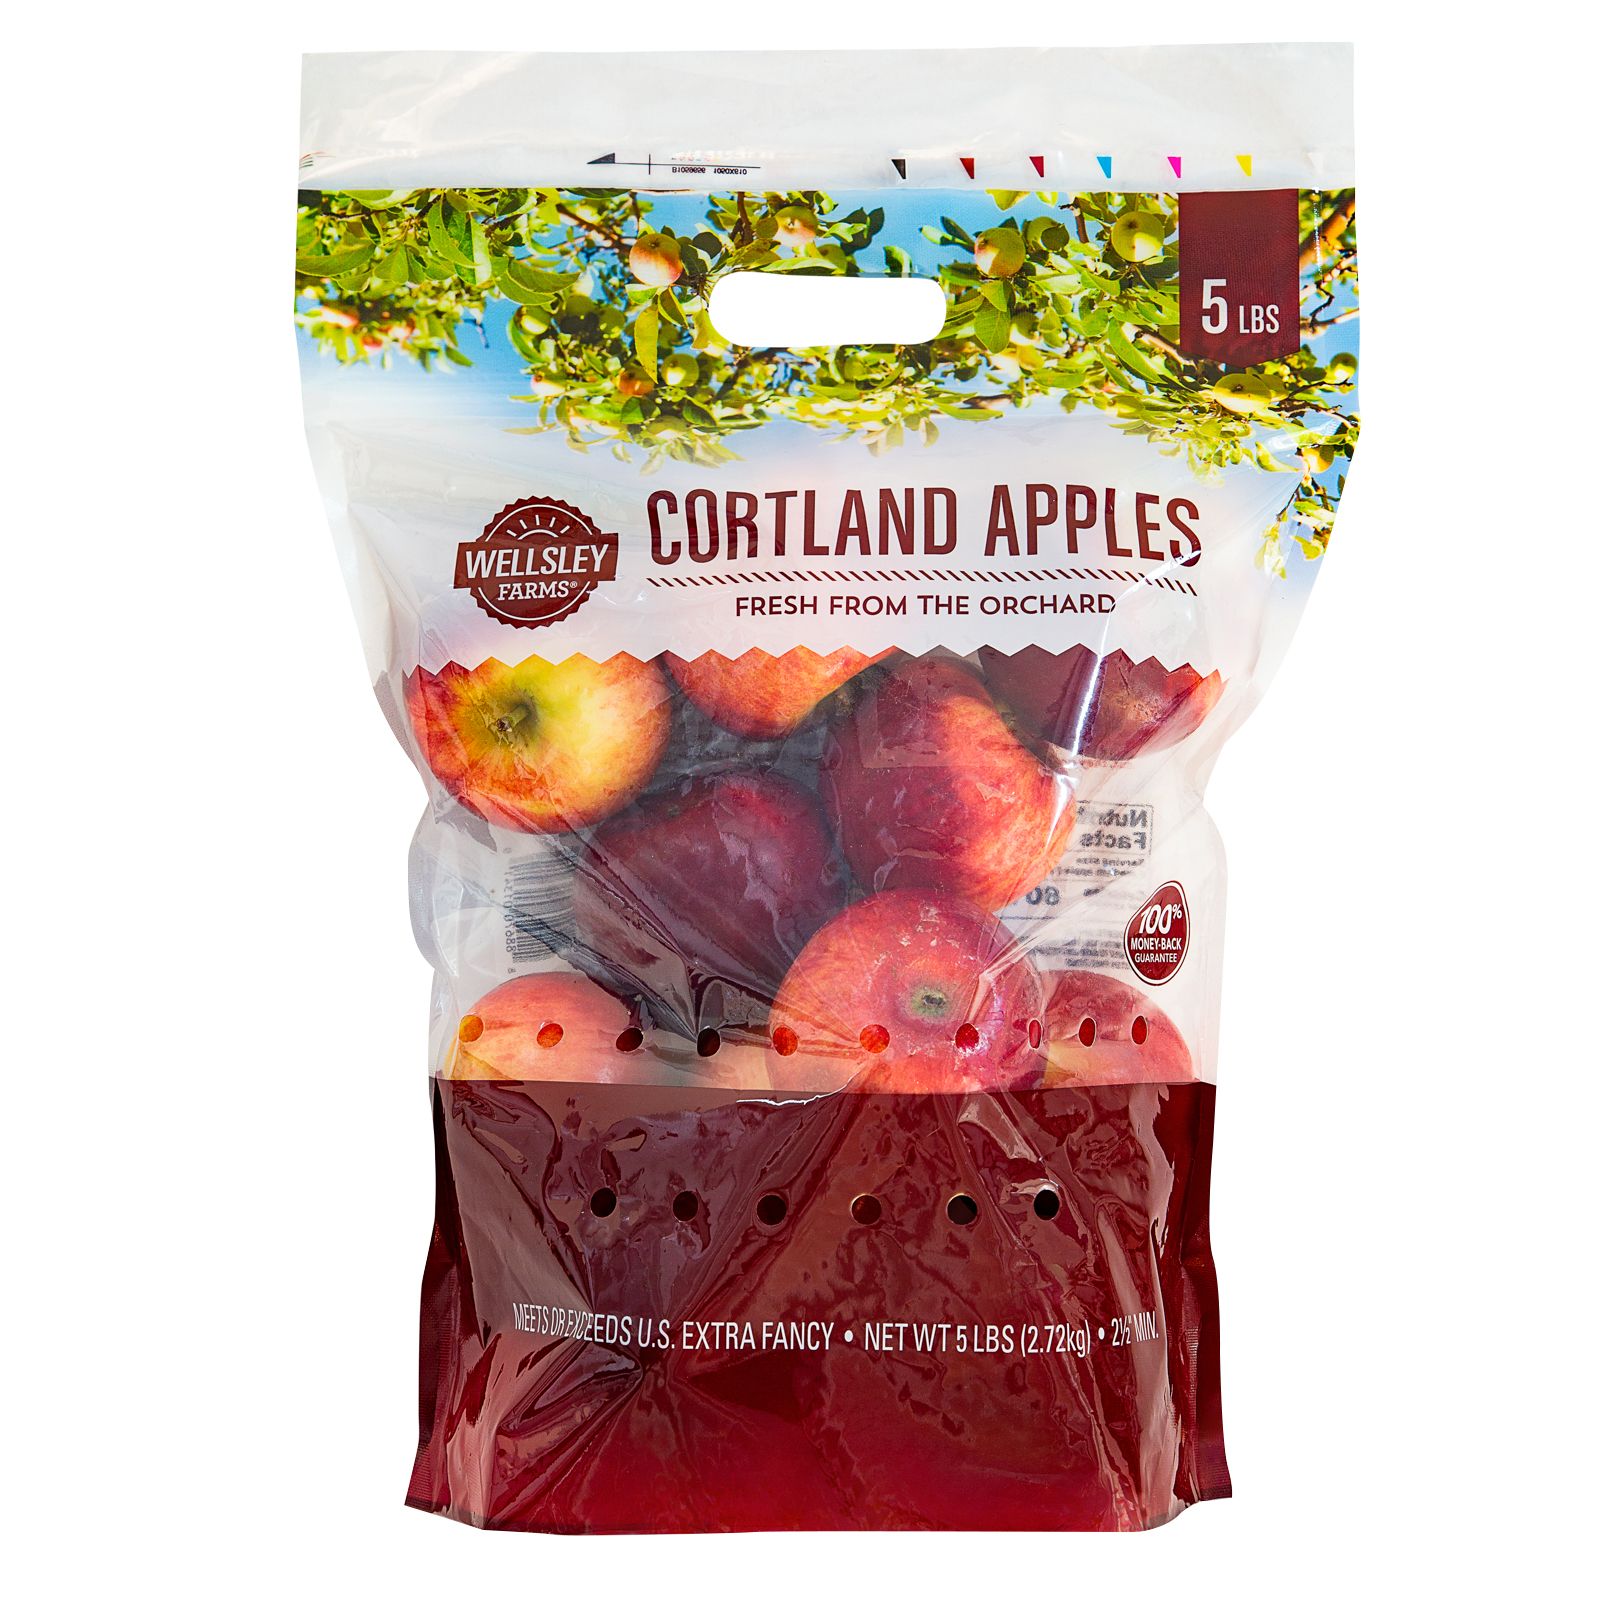 Cortland Apples, Diet tips, Exercise routines